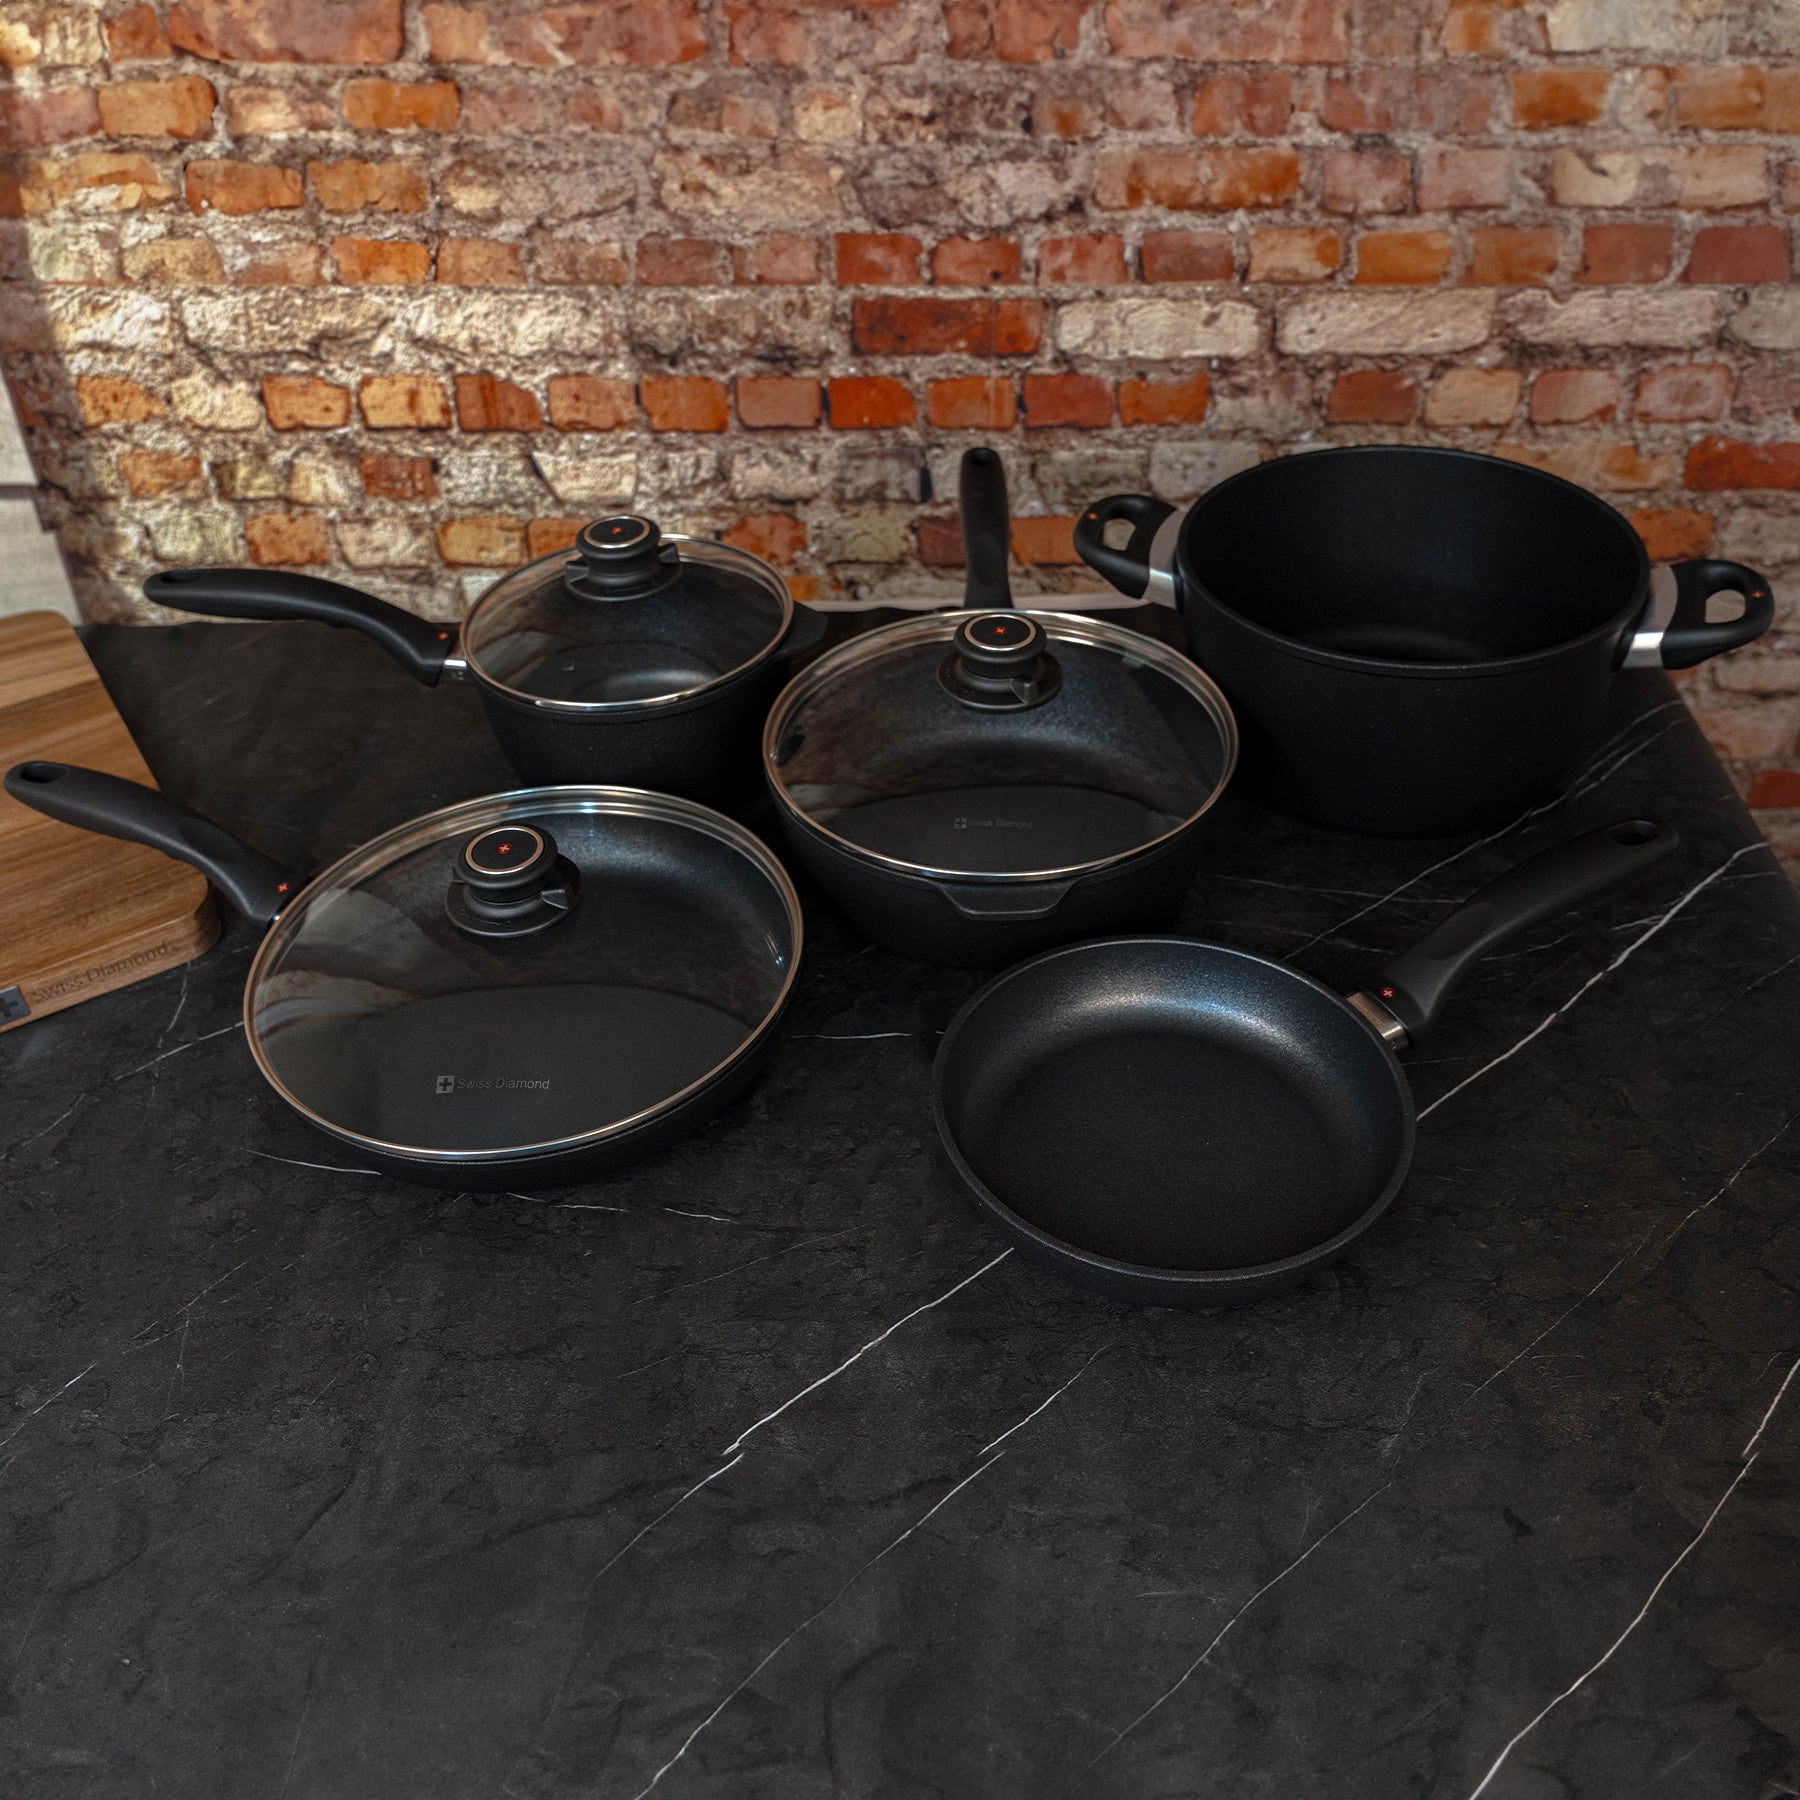 XD Nonstick 9-Piece Set - Kitchen Essentials top angled view with collection sitting on black marble counter top